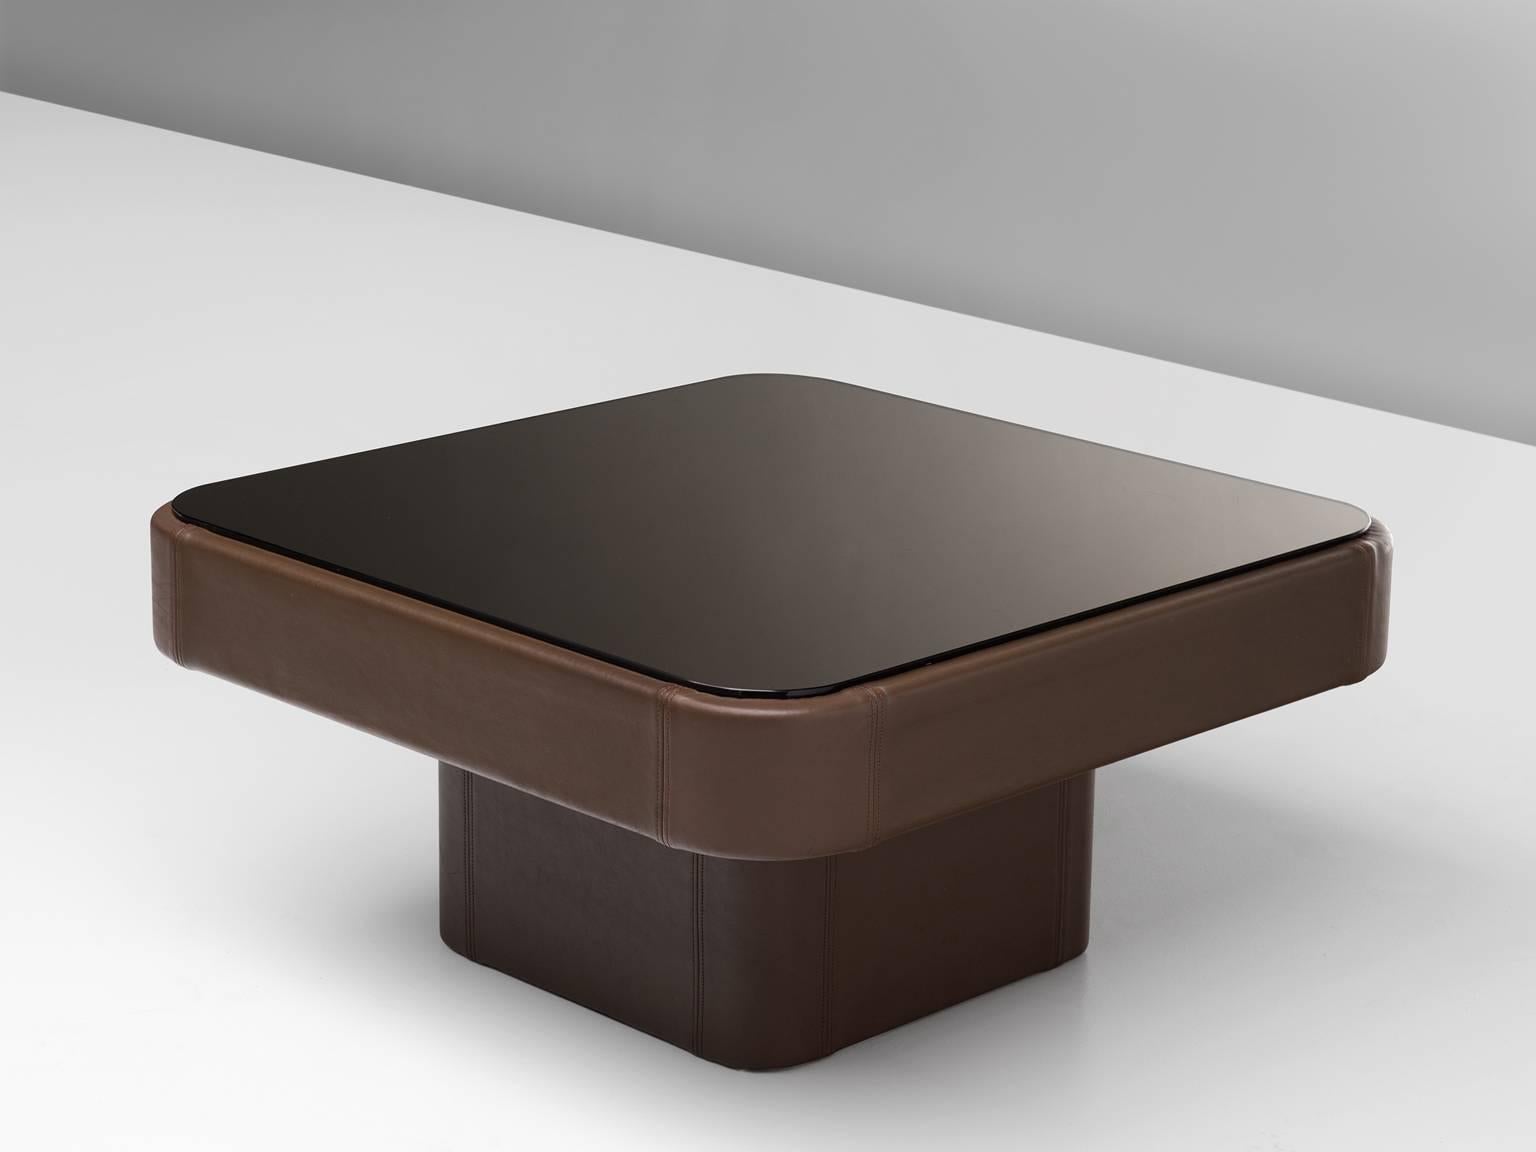 De Sede coffee table, leather, smoked glass, Switzerland, 1970s.

This robust and square cocktail table is designed by de Sede in the 1970s. The table is completely covered in dark brown leather and a smoked glass top. The black and brown are a